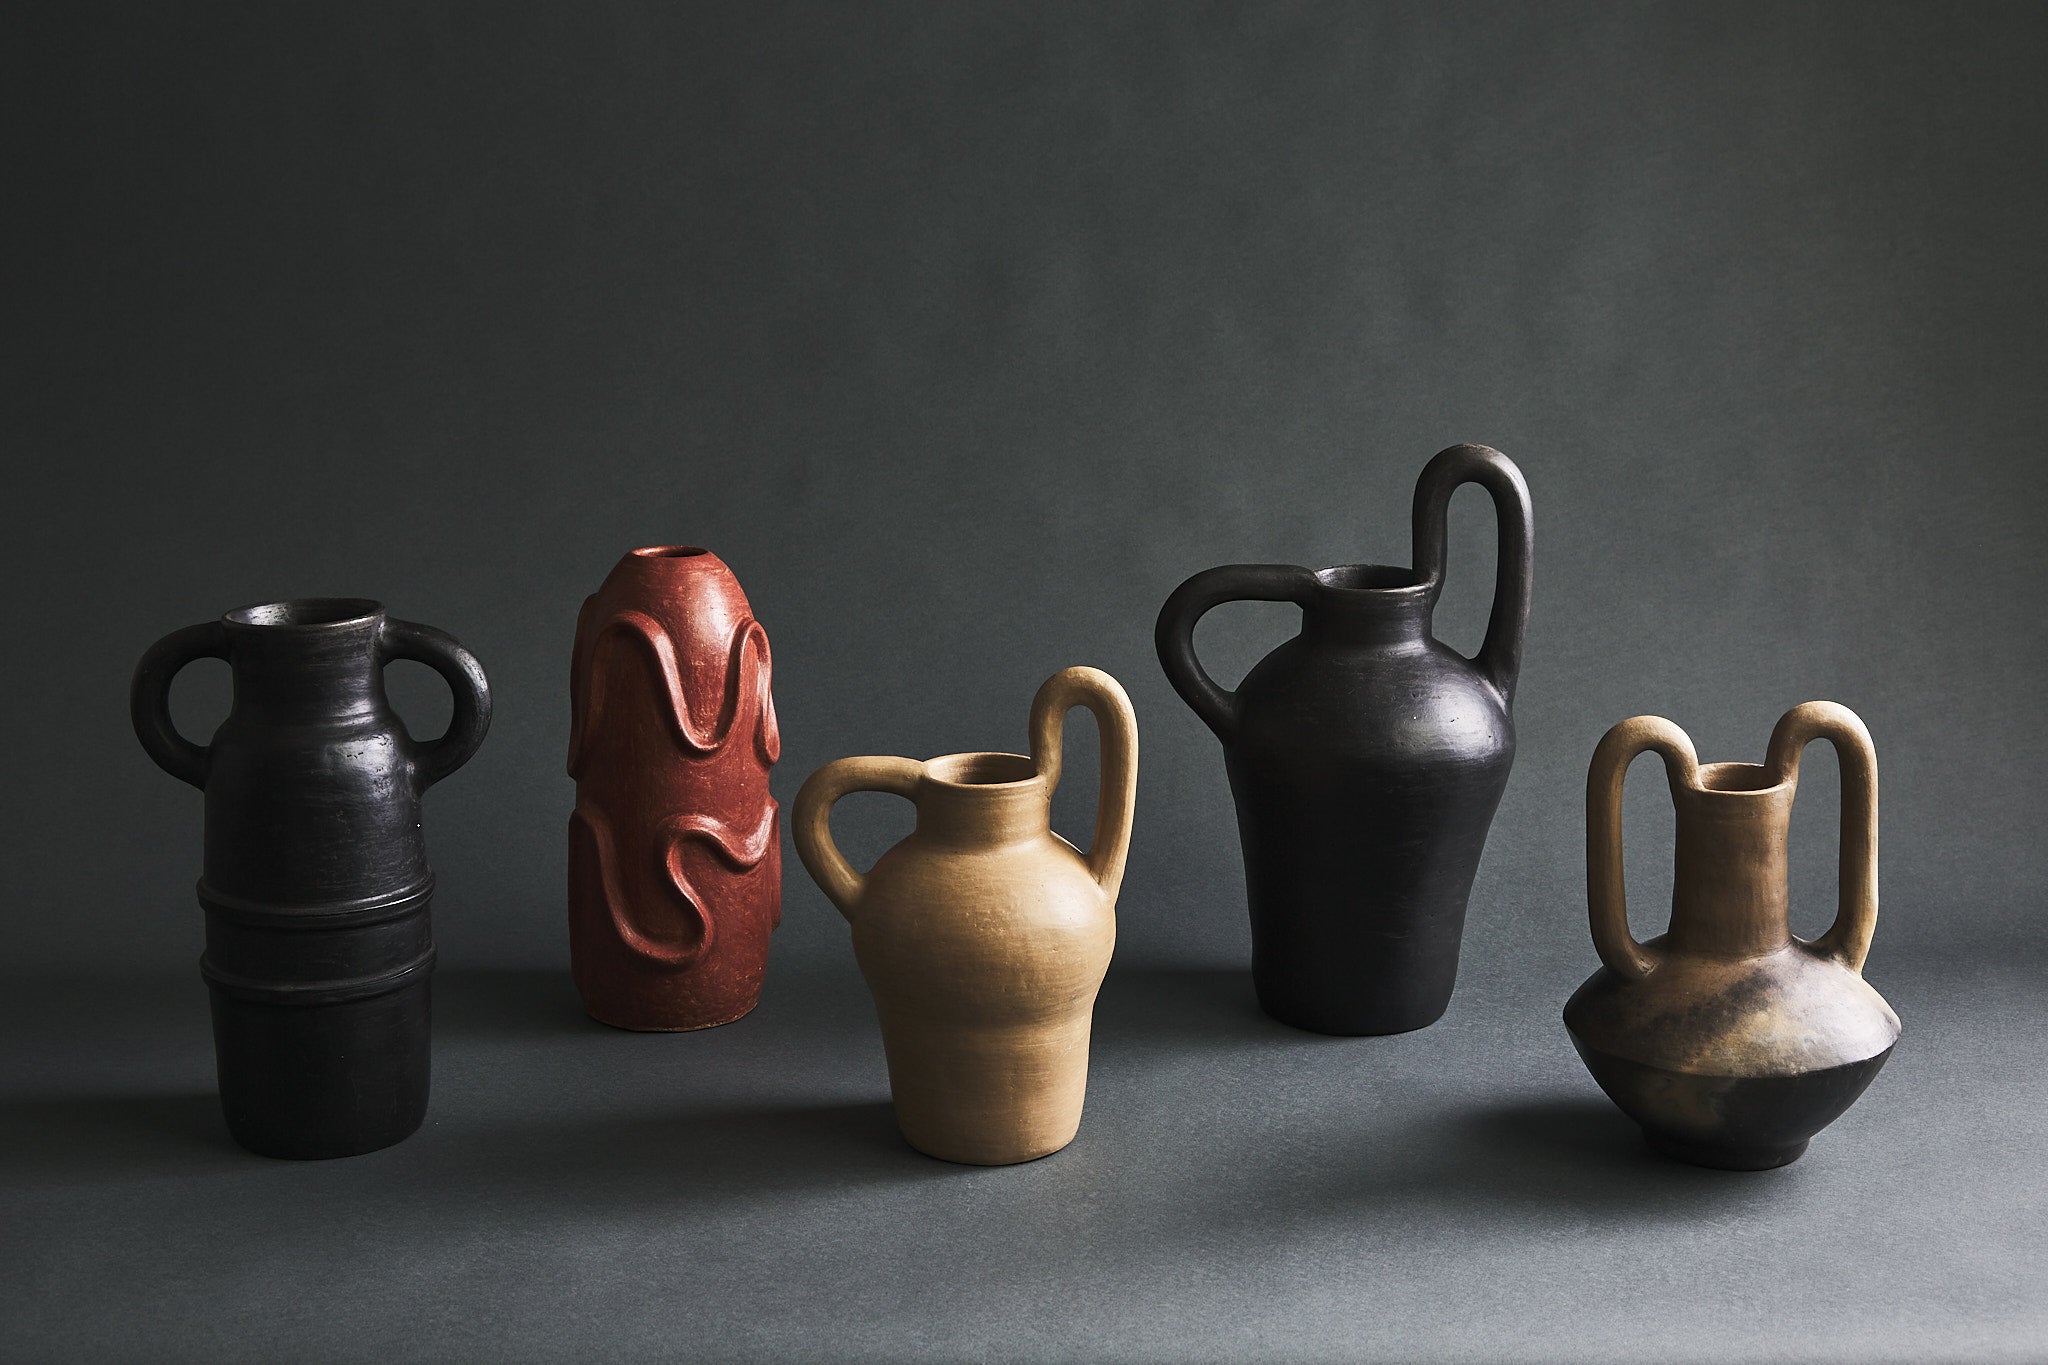 Collection of handmade decorative clay vases made in Mexico